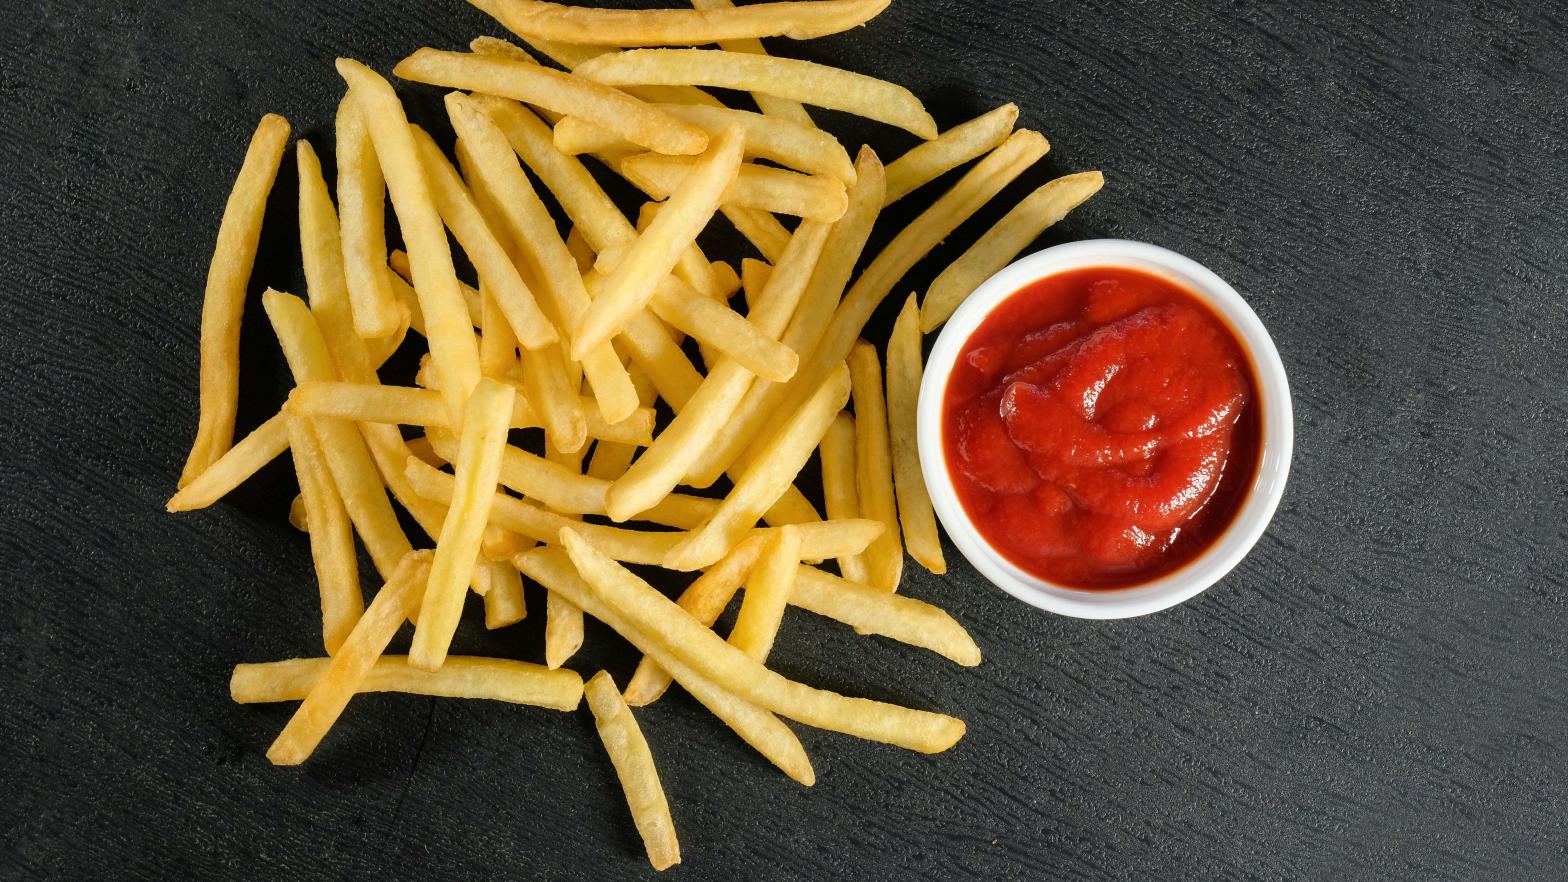 This Is Actually the Best Way to Reheat Fries